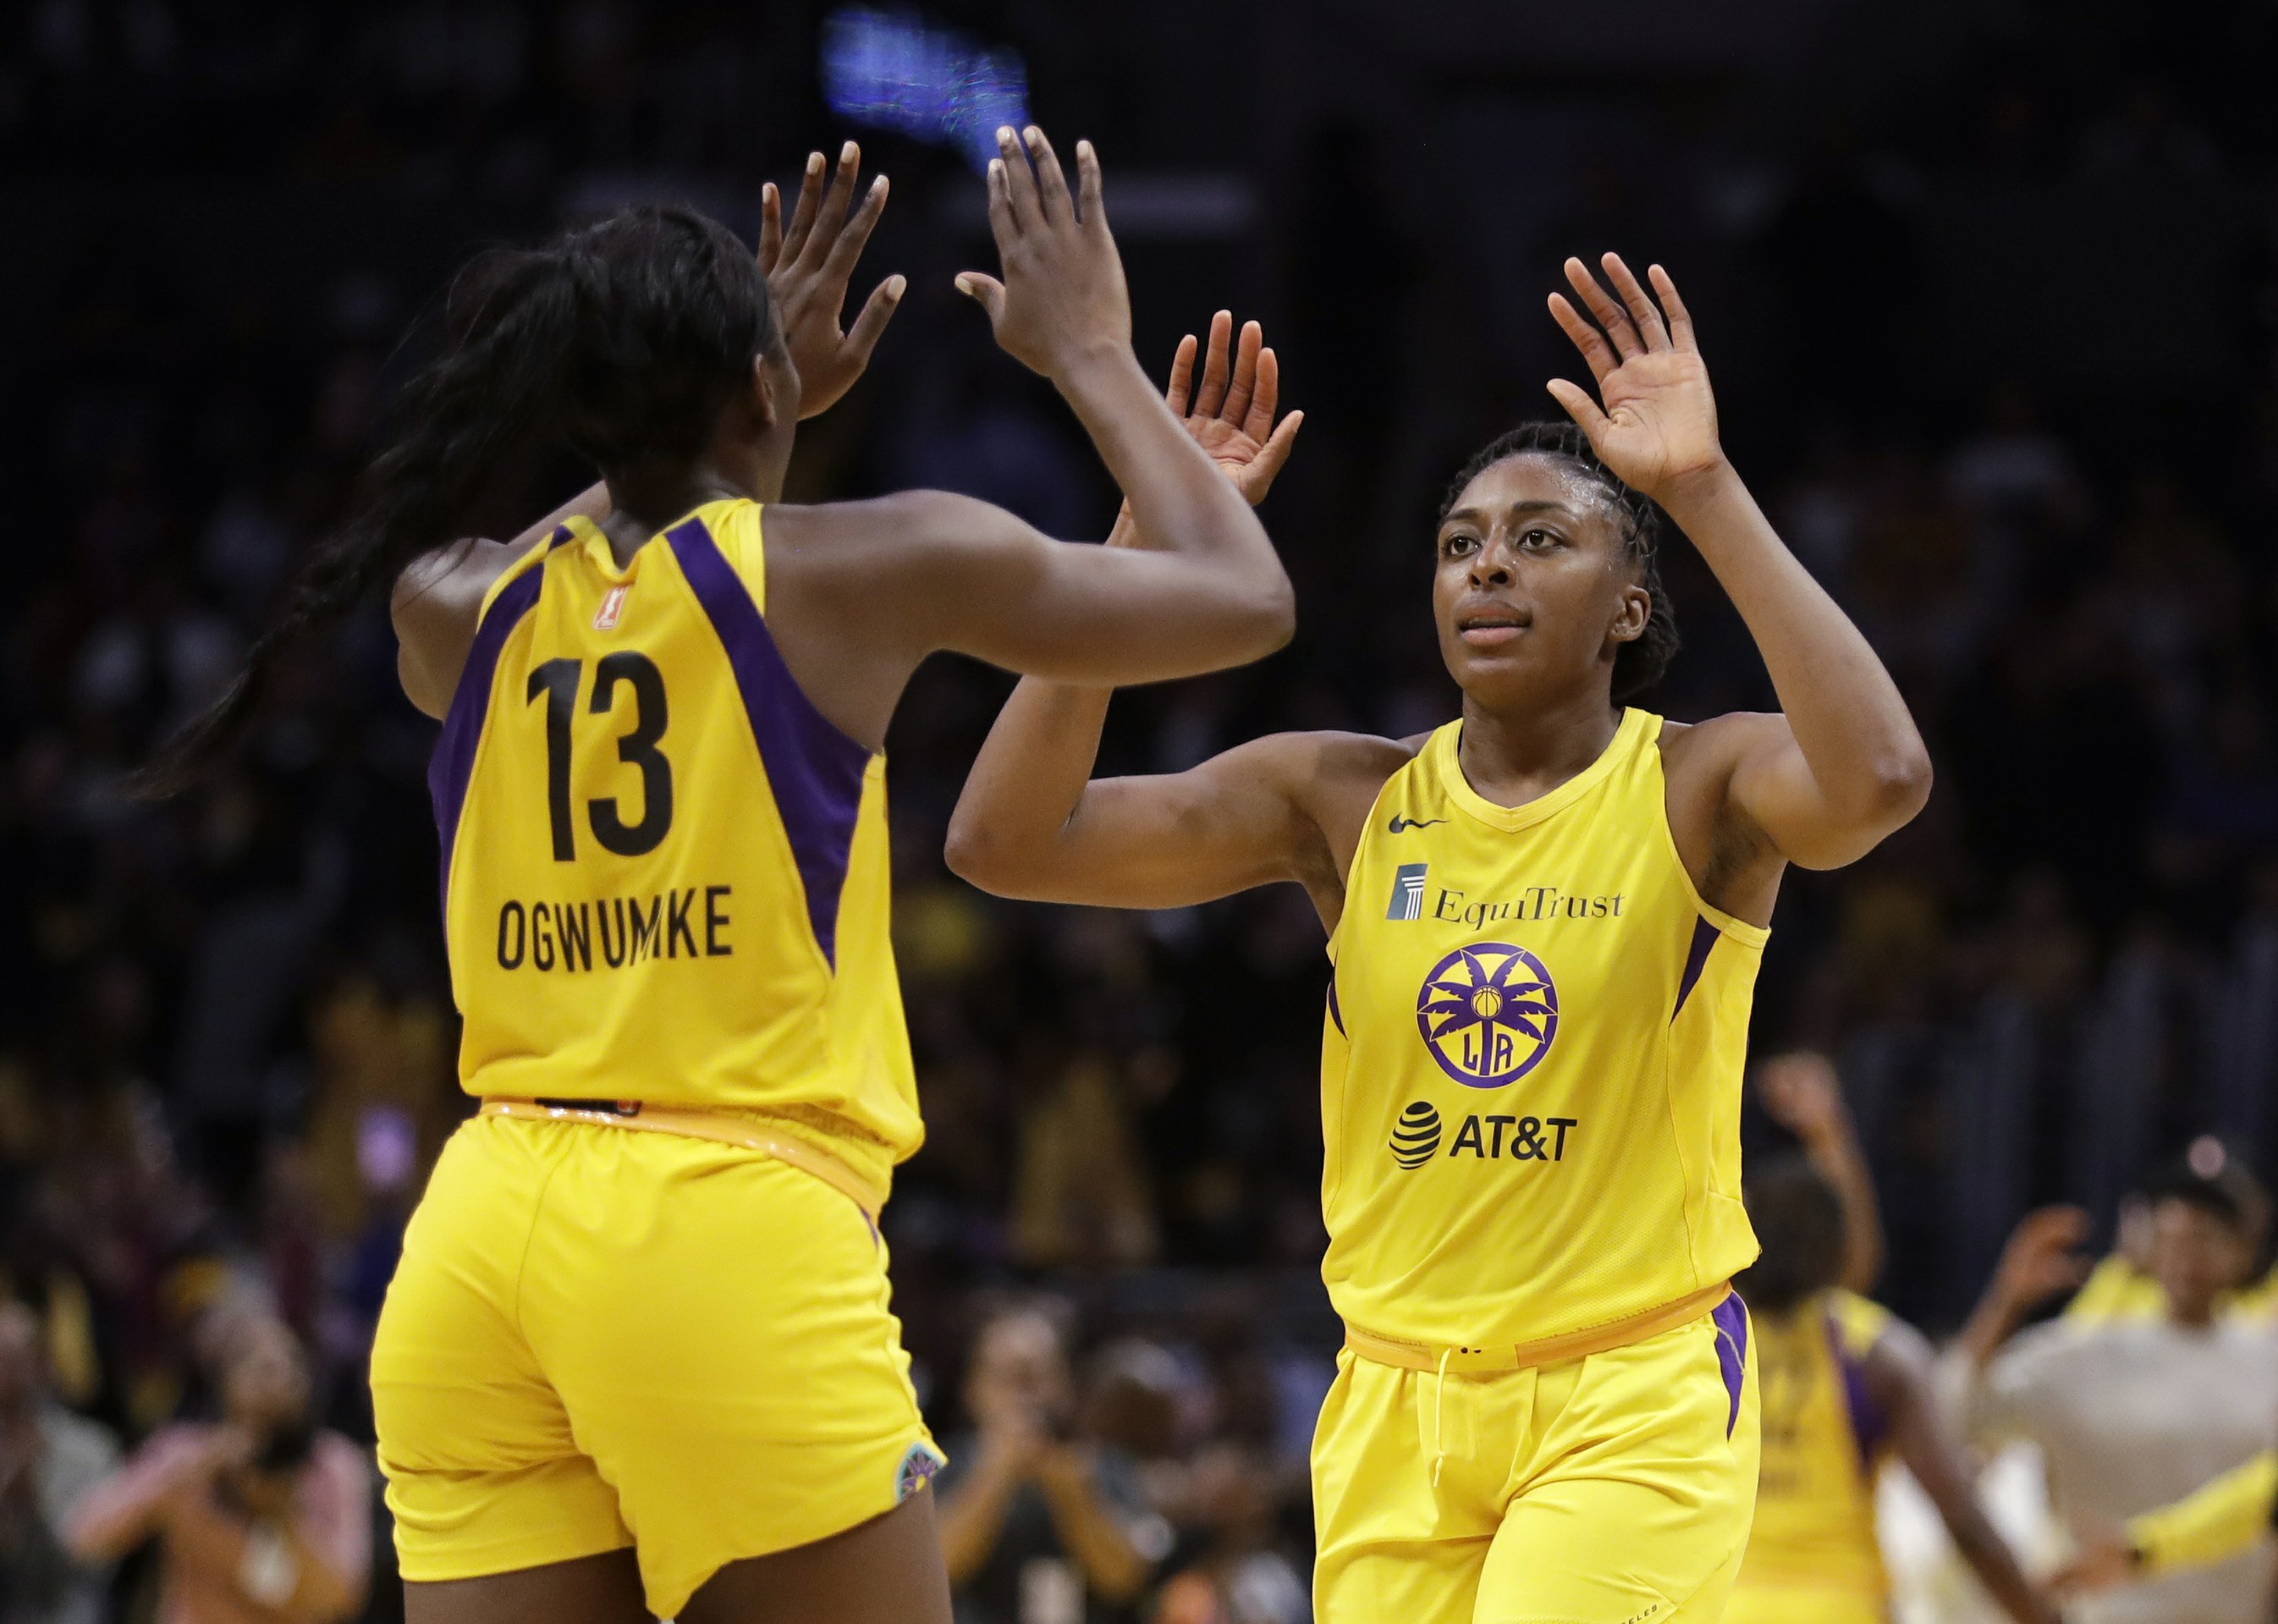 LOS ANGELES (AP) — Chiney Ogwumike scored 20 points on